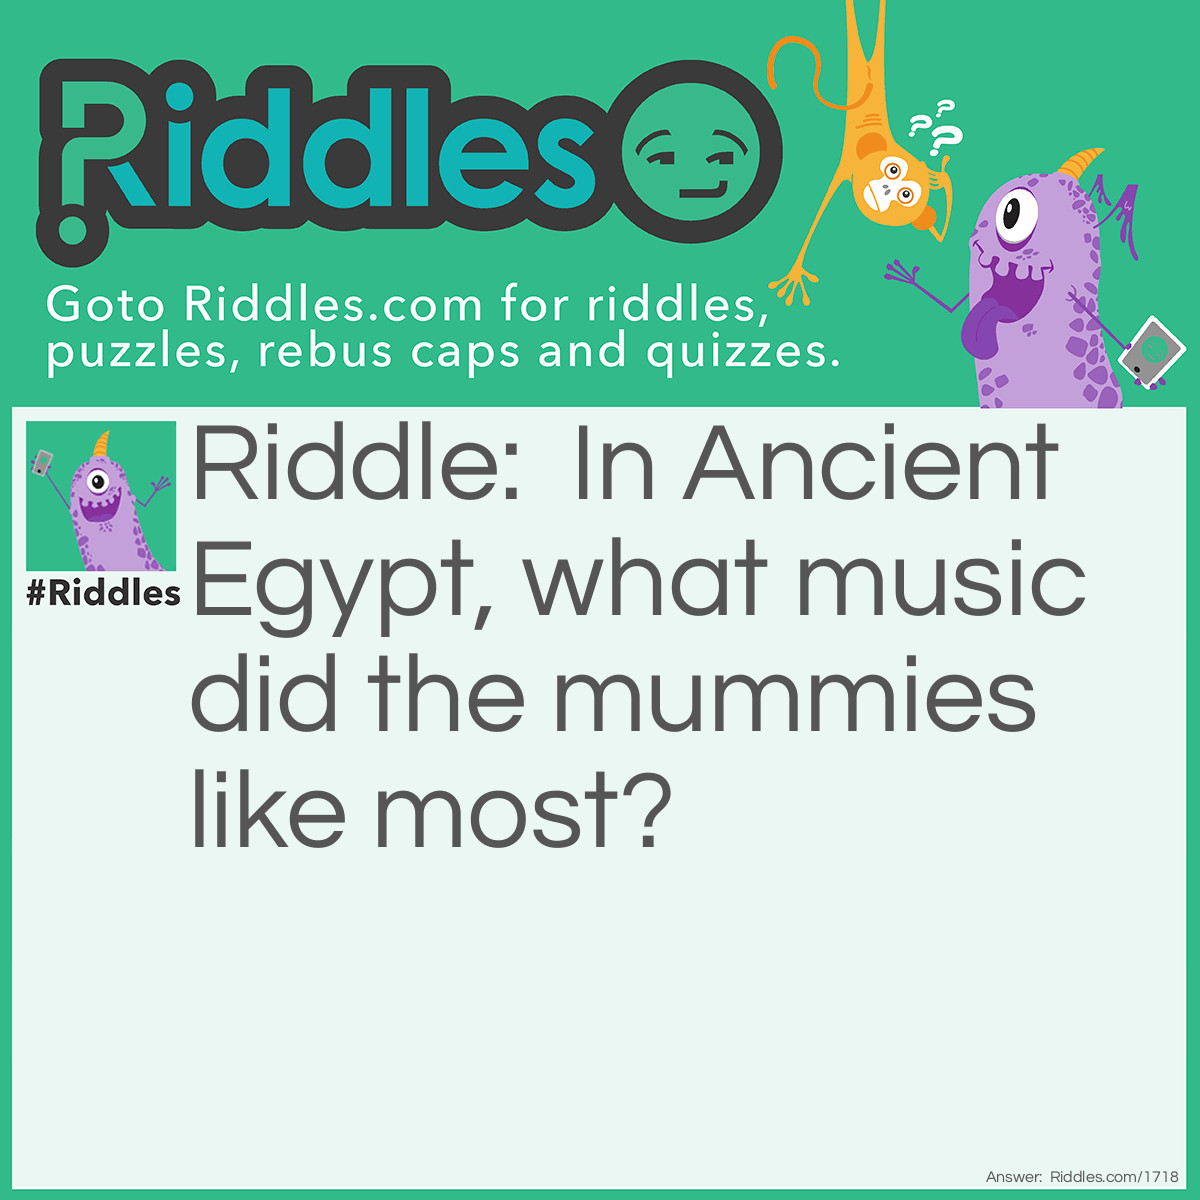 Riddle: In Ancient Egypt, what music did the mummies like most? Answer: Wrap Music.